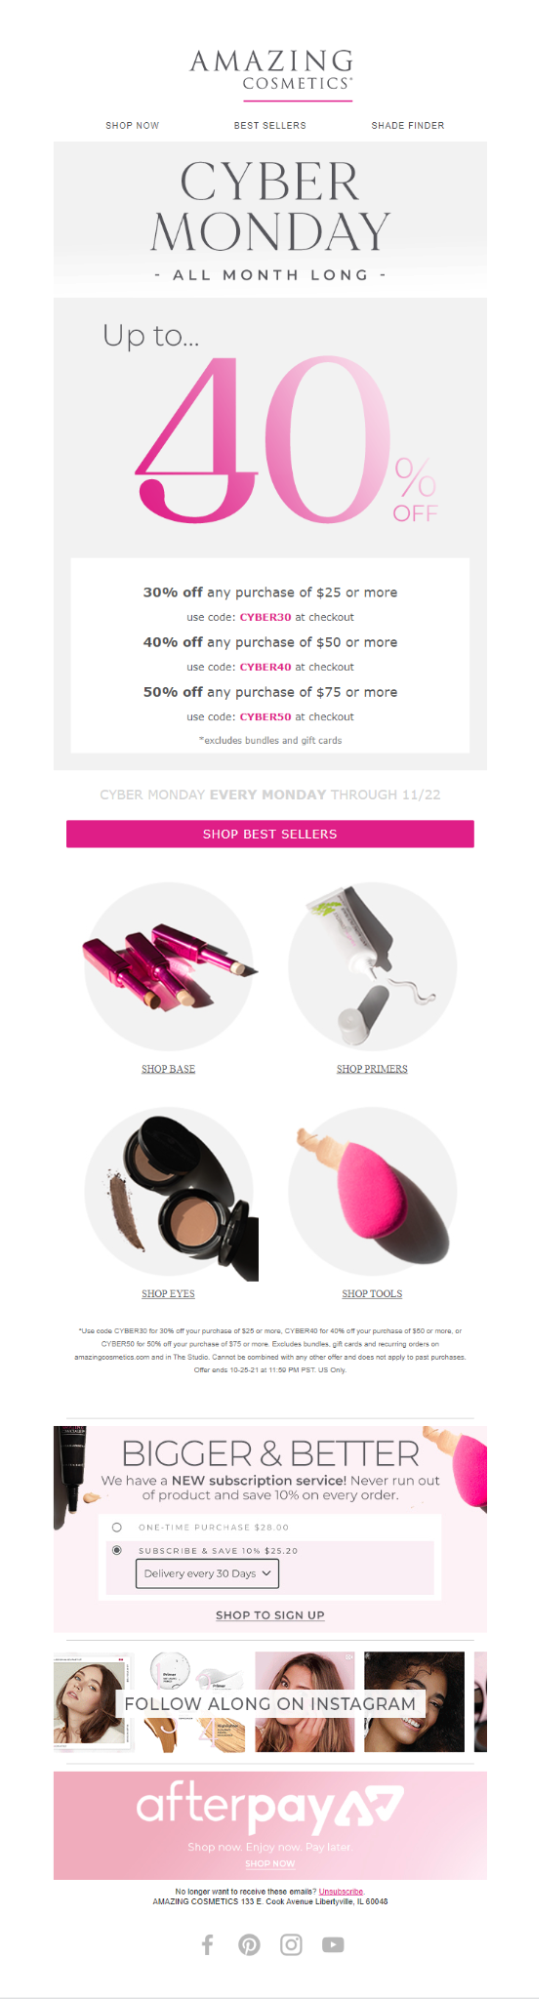 Amazing Cosmetics
Cyber Monday email template
